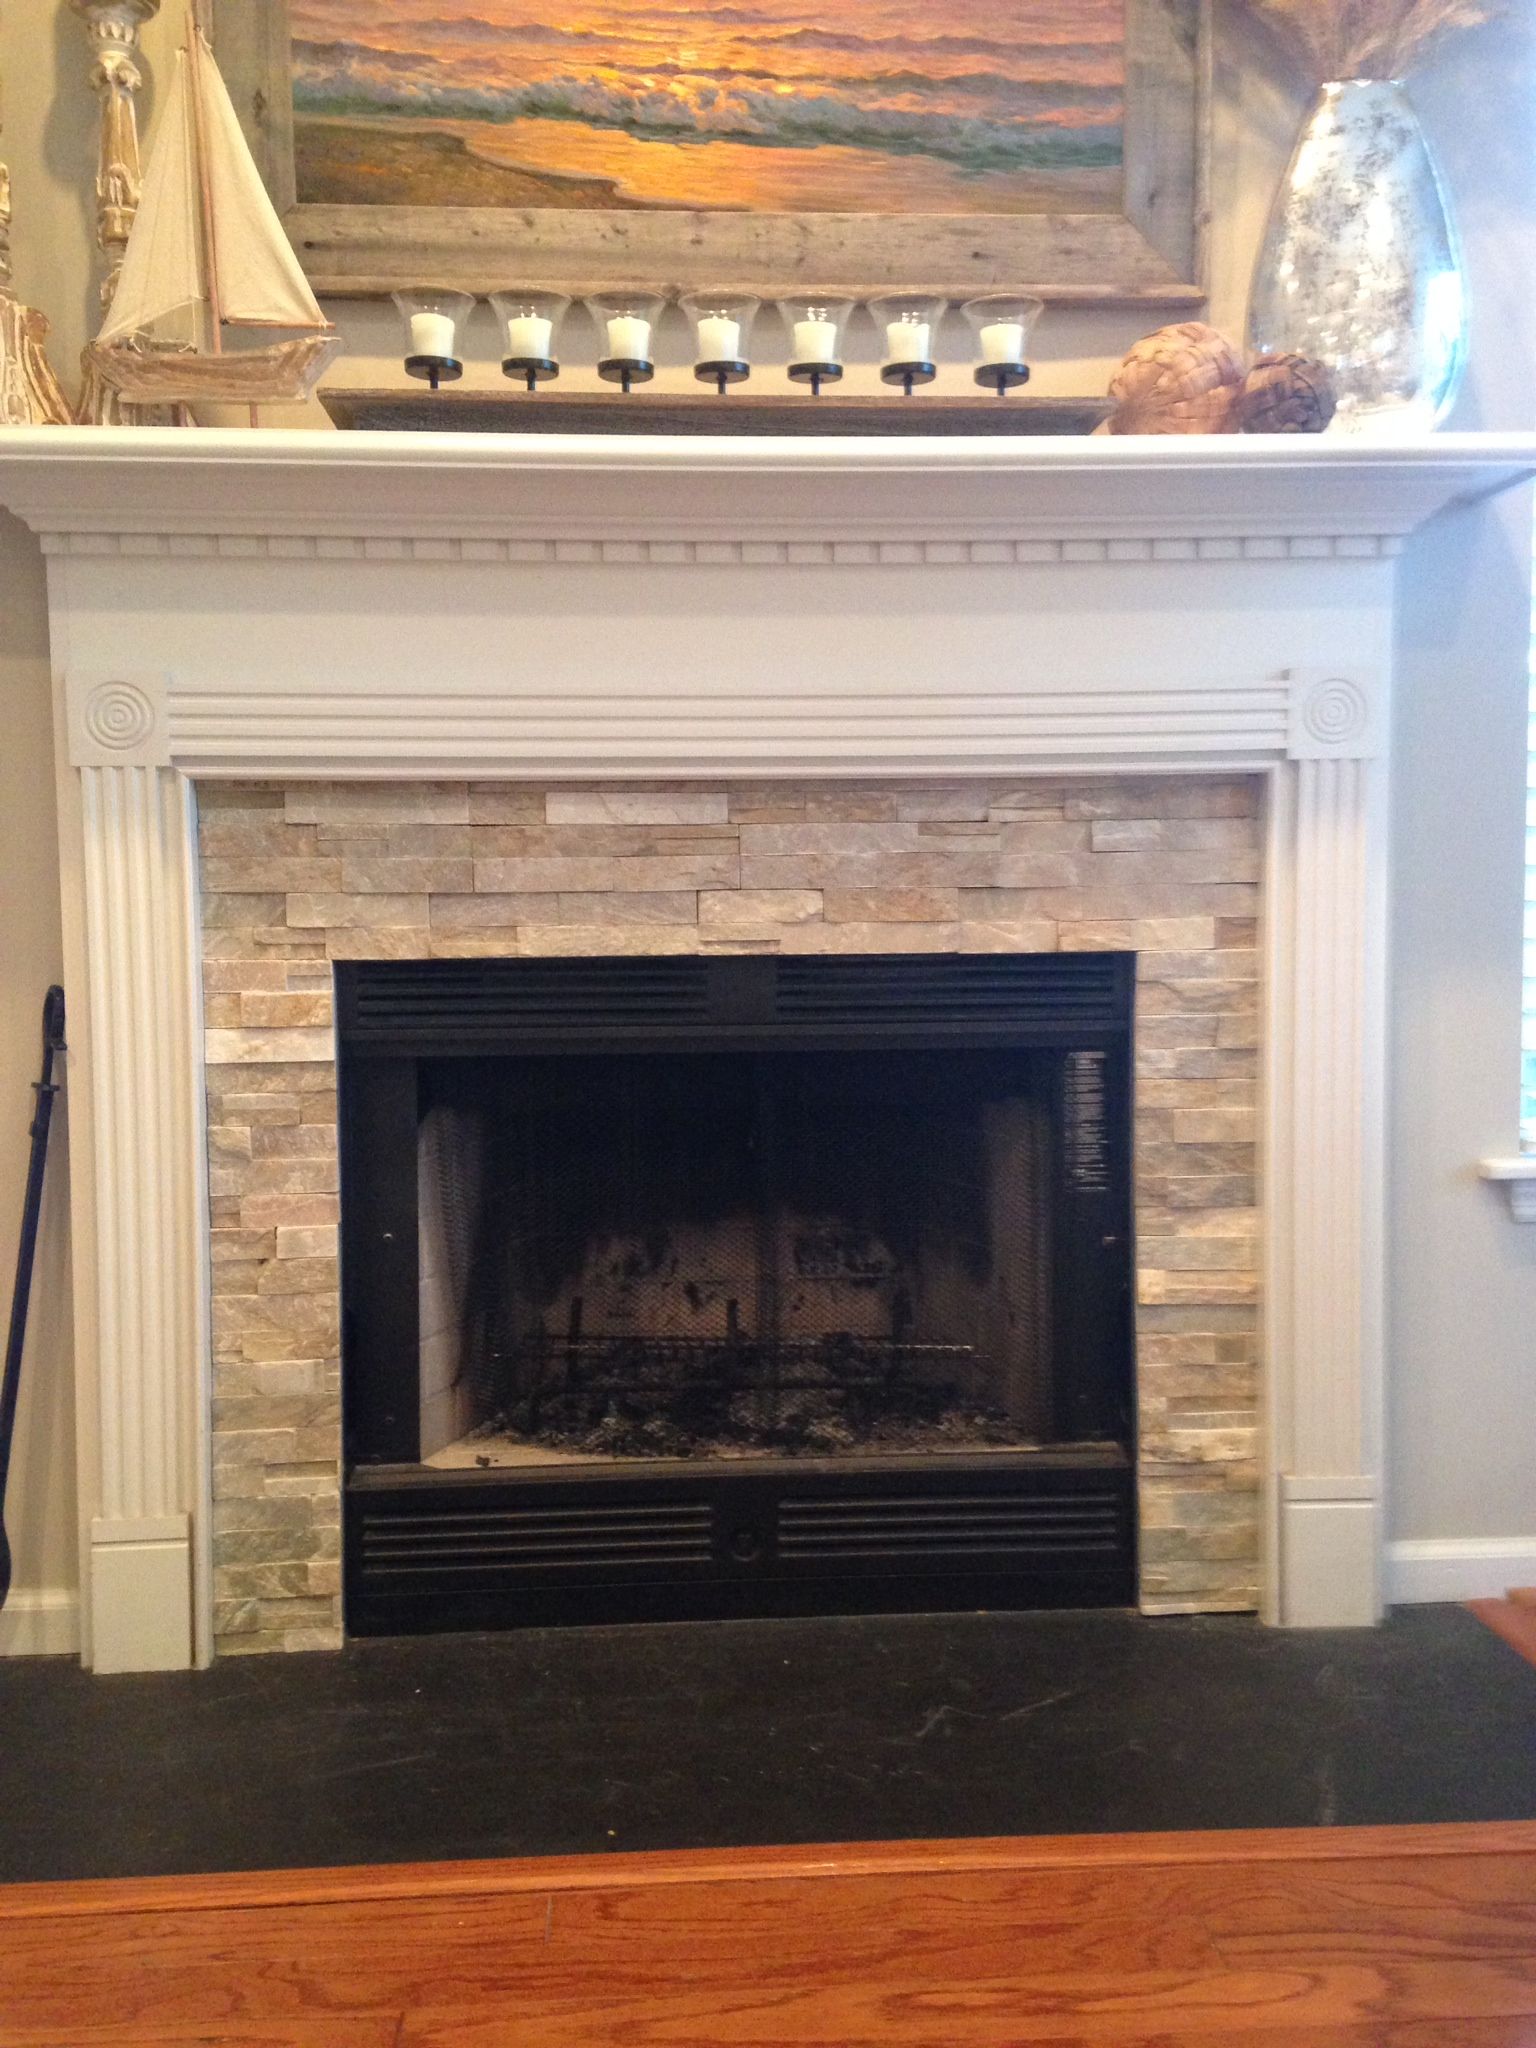 Wooden Fireplace Surround Ideas Awesome Fireplace Idea Mantel Wainscoting Design Craftsman